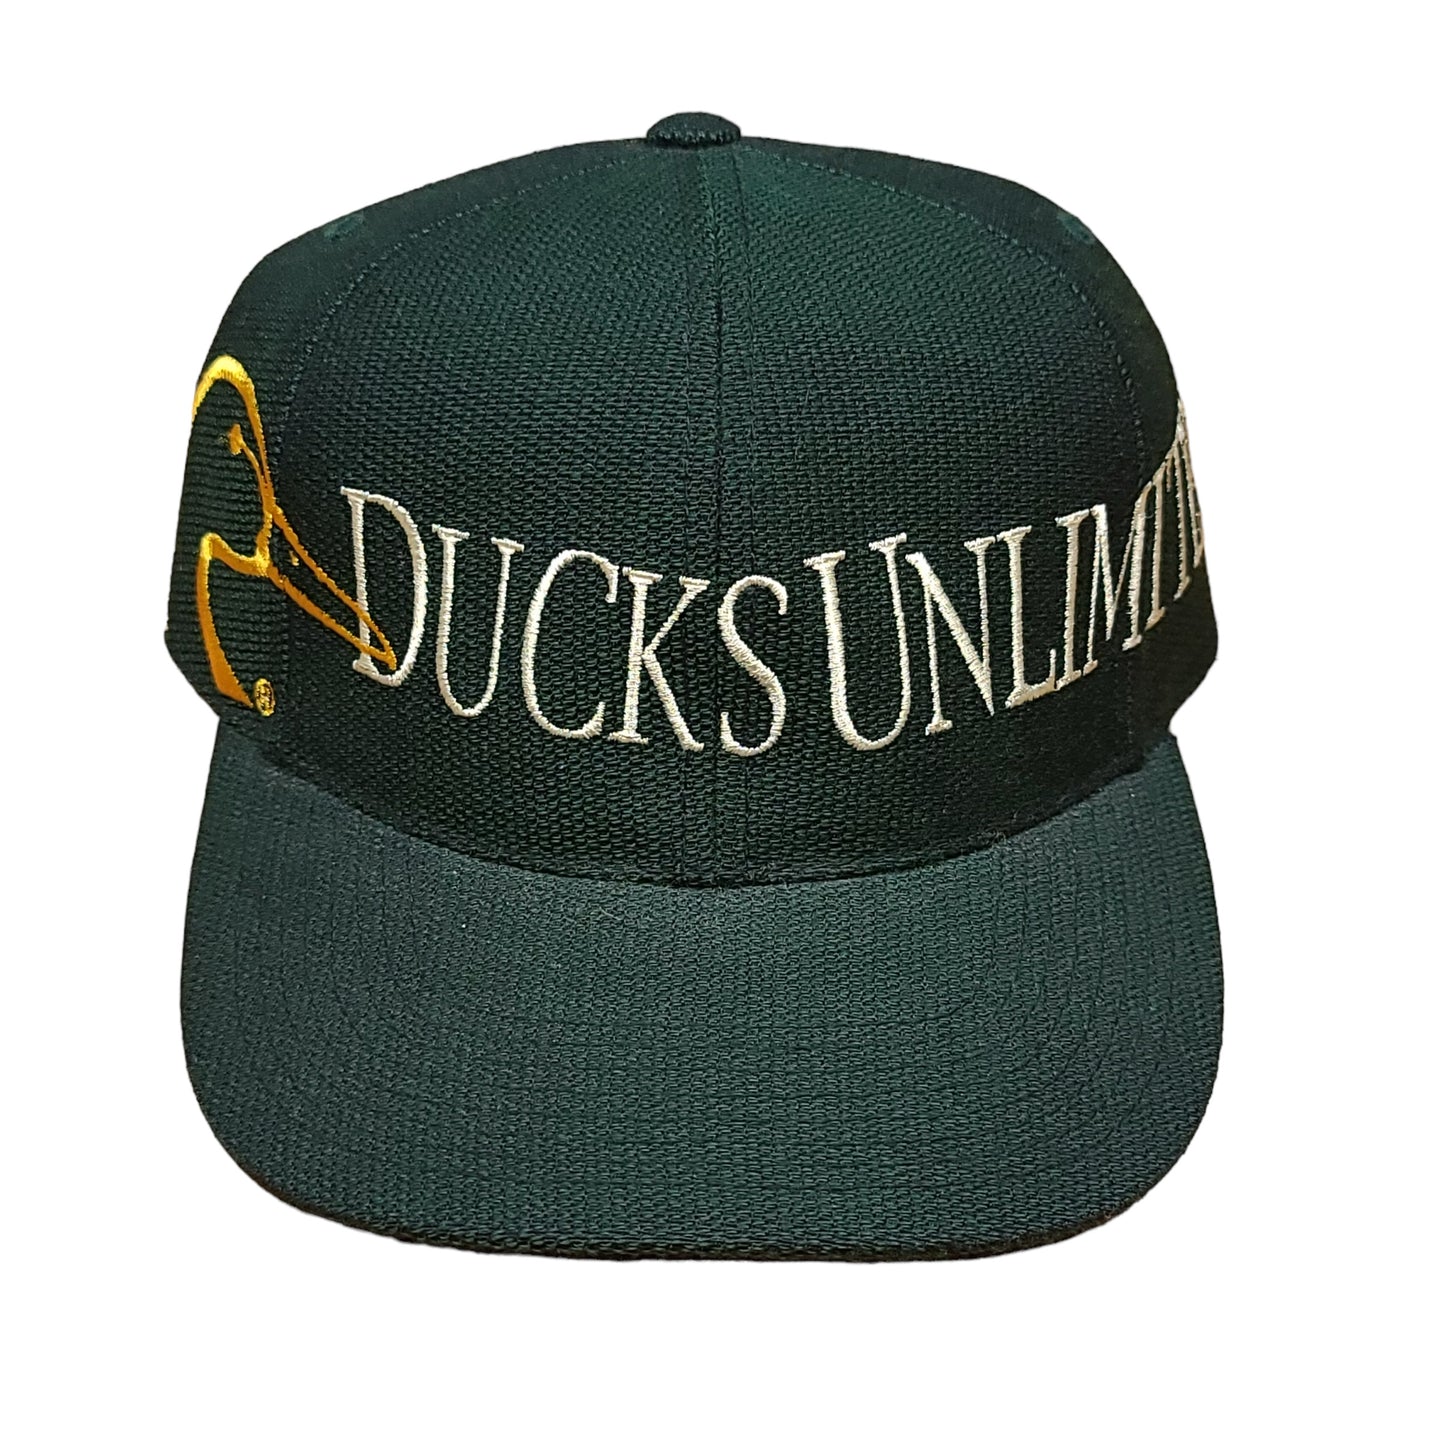 Ducks Unlimited Green Strap Back Hunting Hat